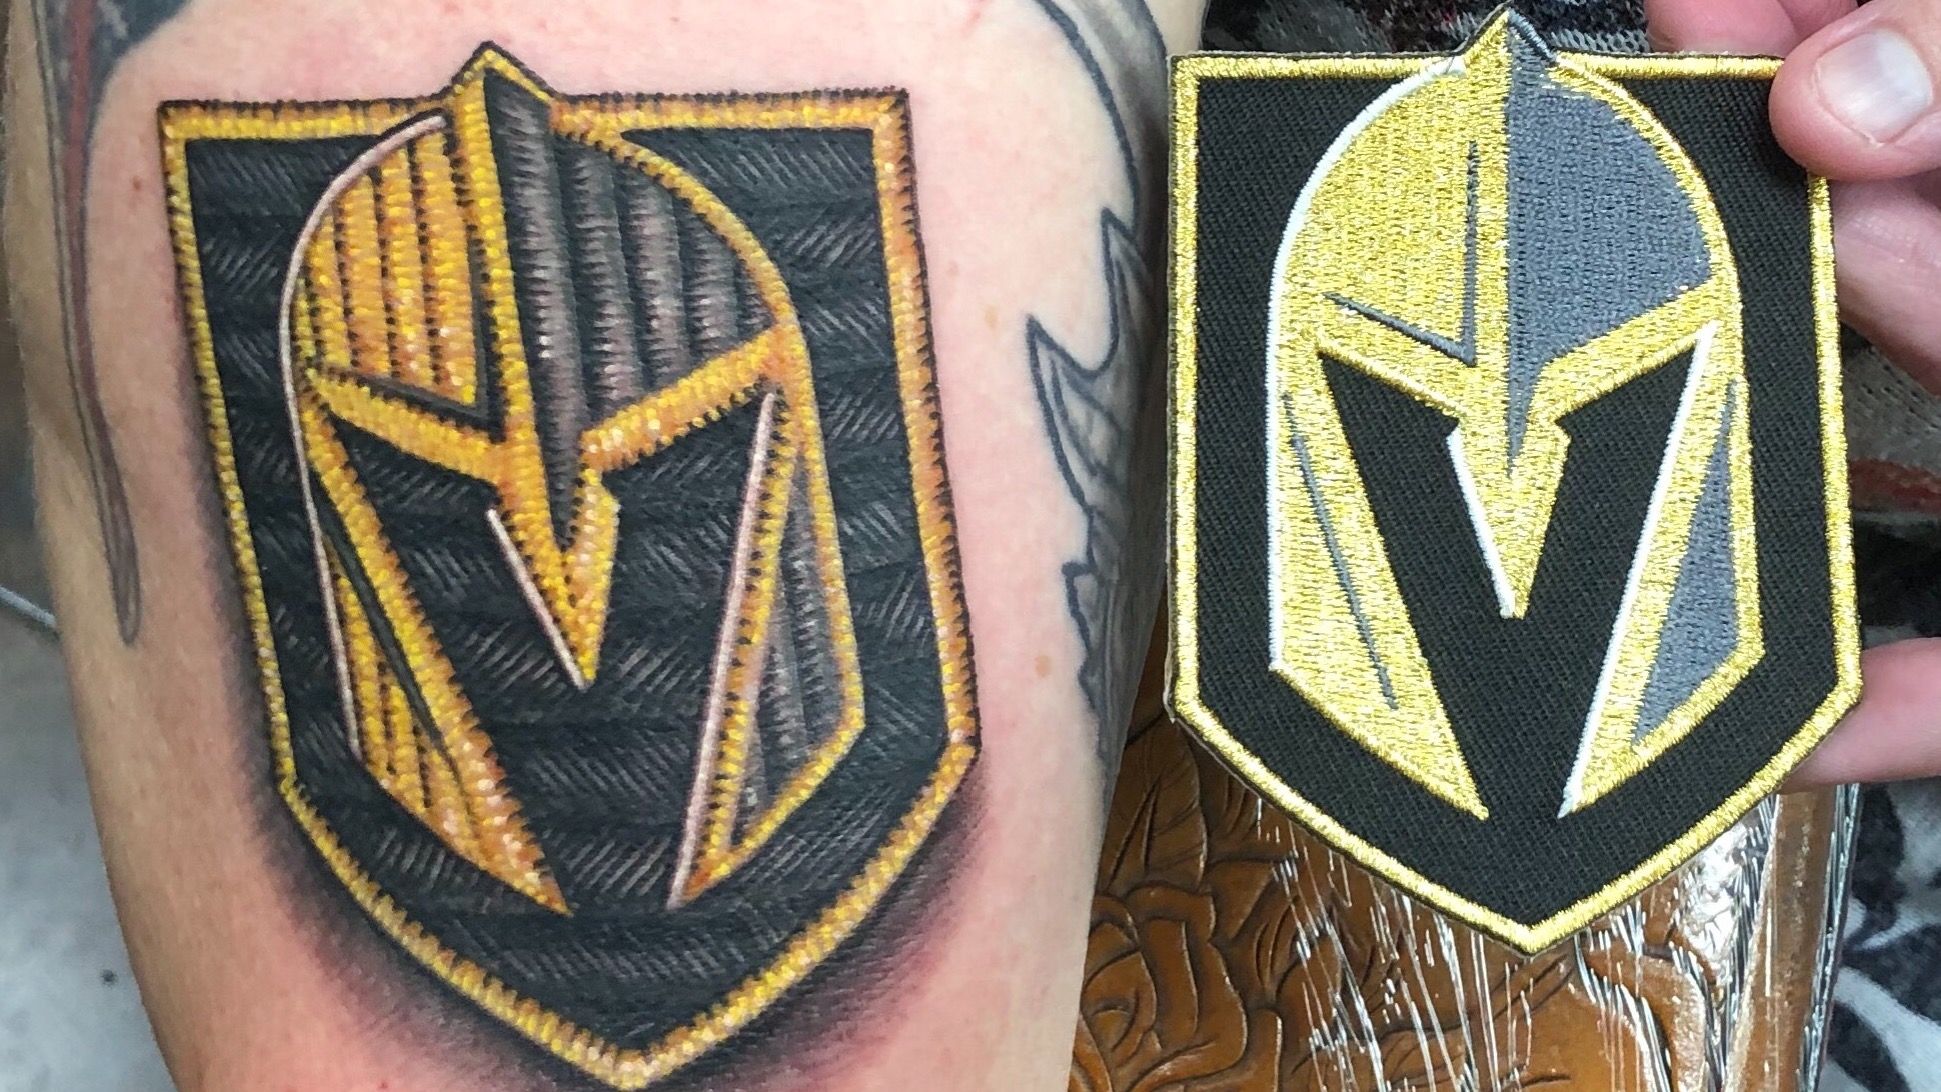 Tattoo uploaded by Stacy Bartlett Krupco • My Vegas Golden Knights  embroidered logo patch tattoo. Artist Matt Womack of St. Louis Tattoo  Company. Done 9/19/19. Picture 1/2. • Tattoodo